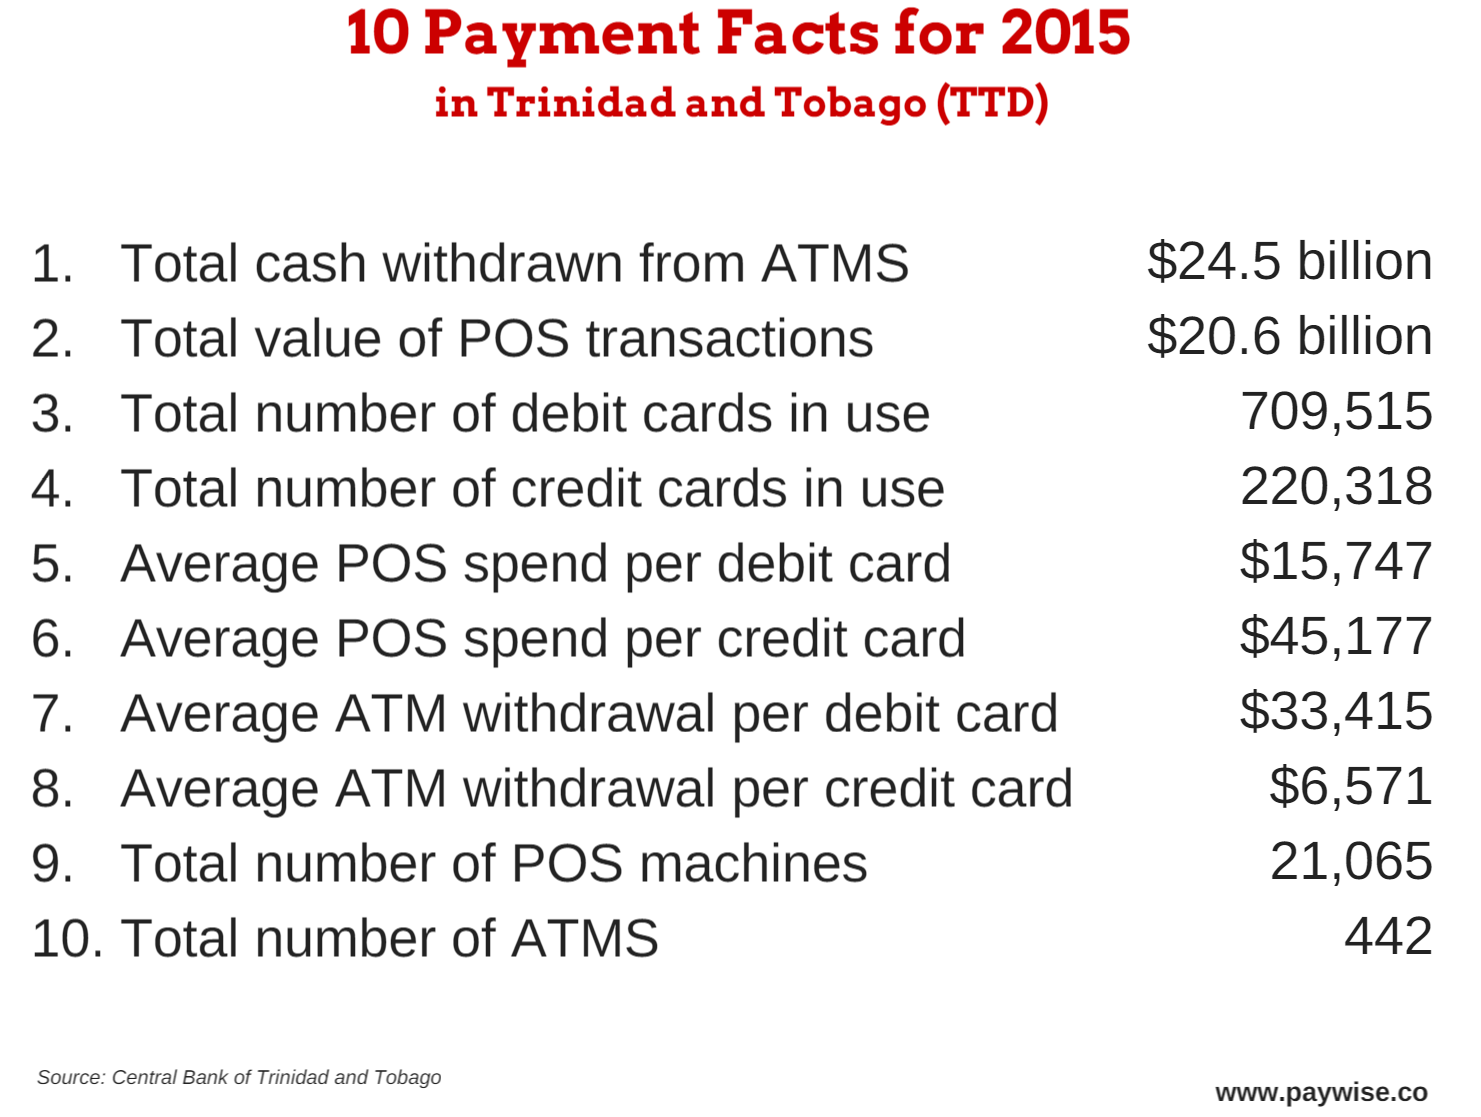 10 Payment Facts for 2015